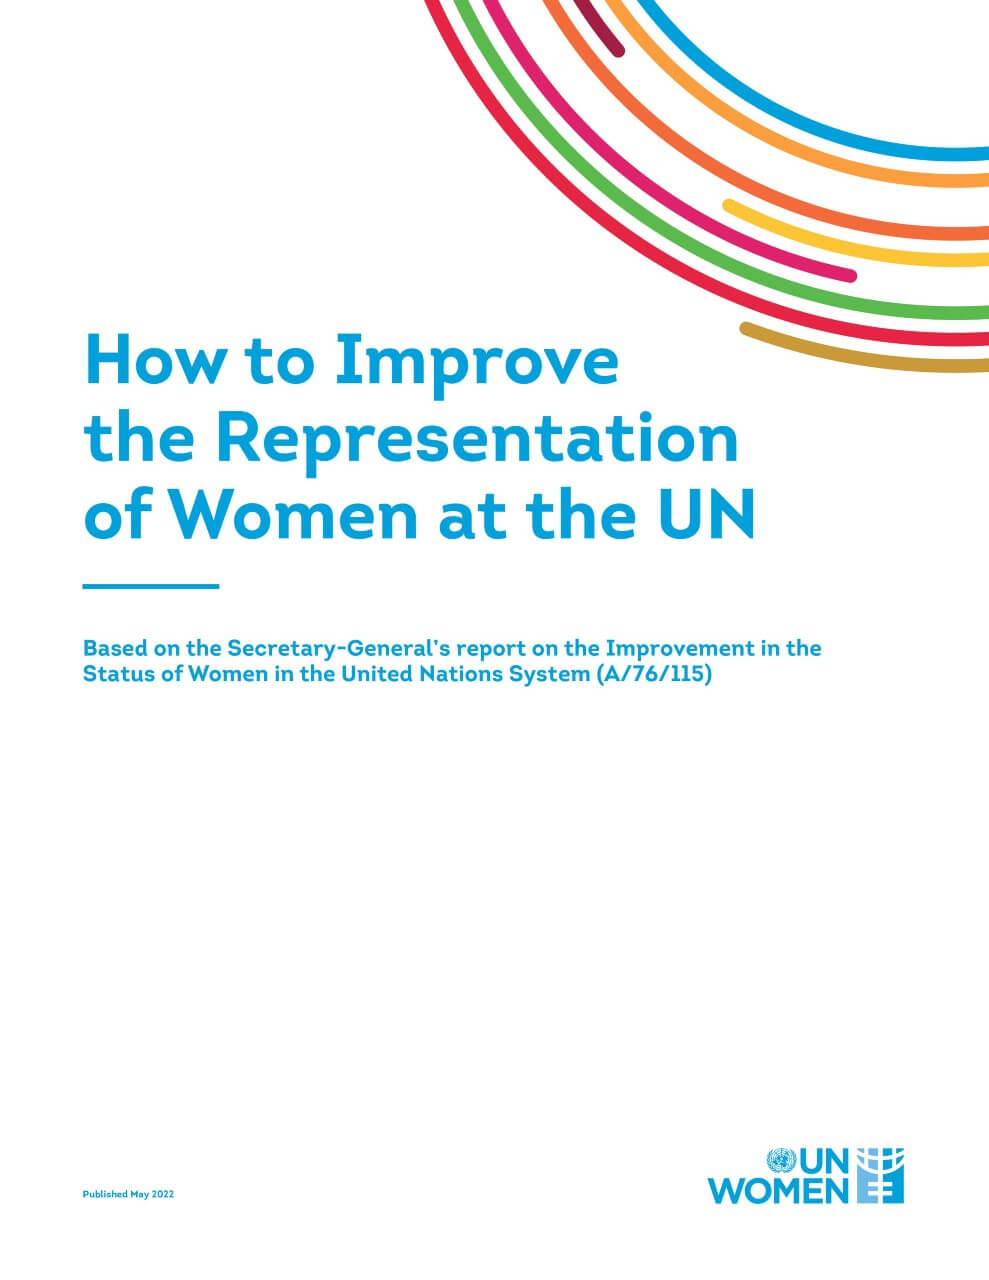 Secretary-General’s report and resolution summary: How to improve the representation of women at the United Nations